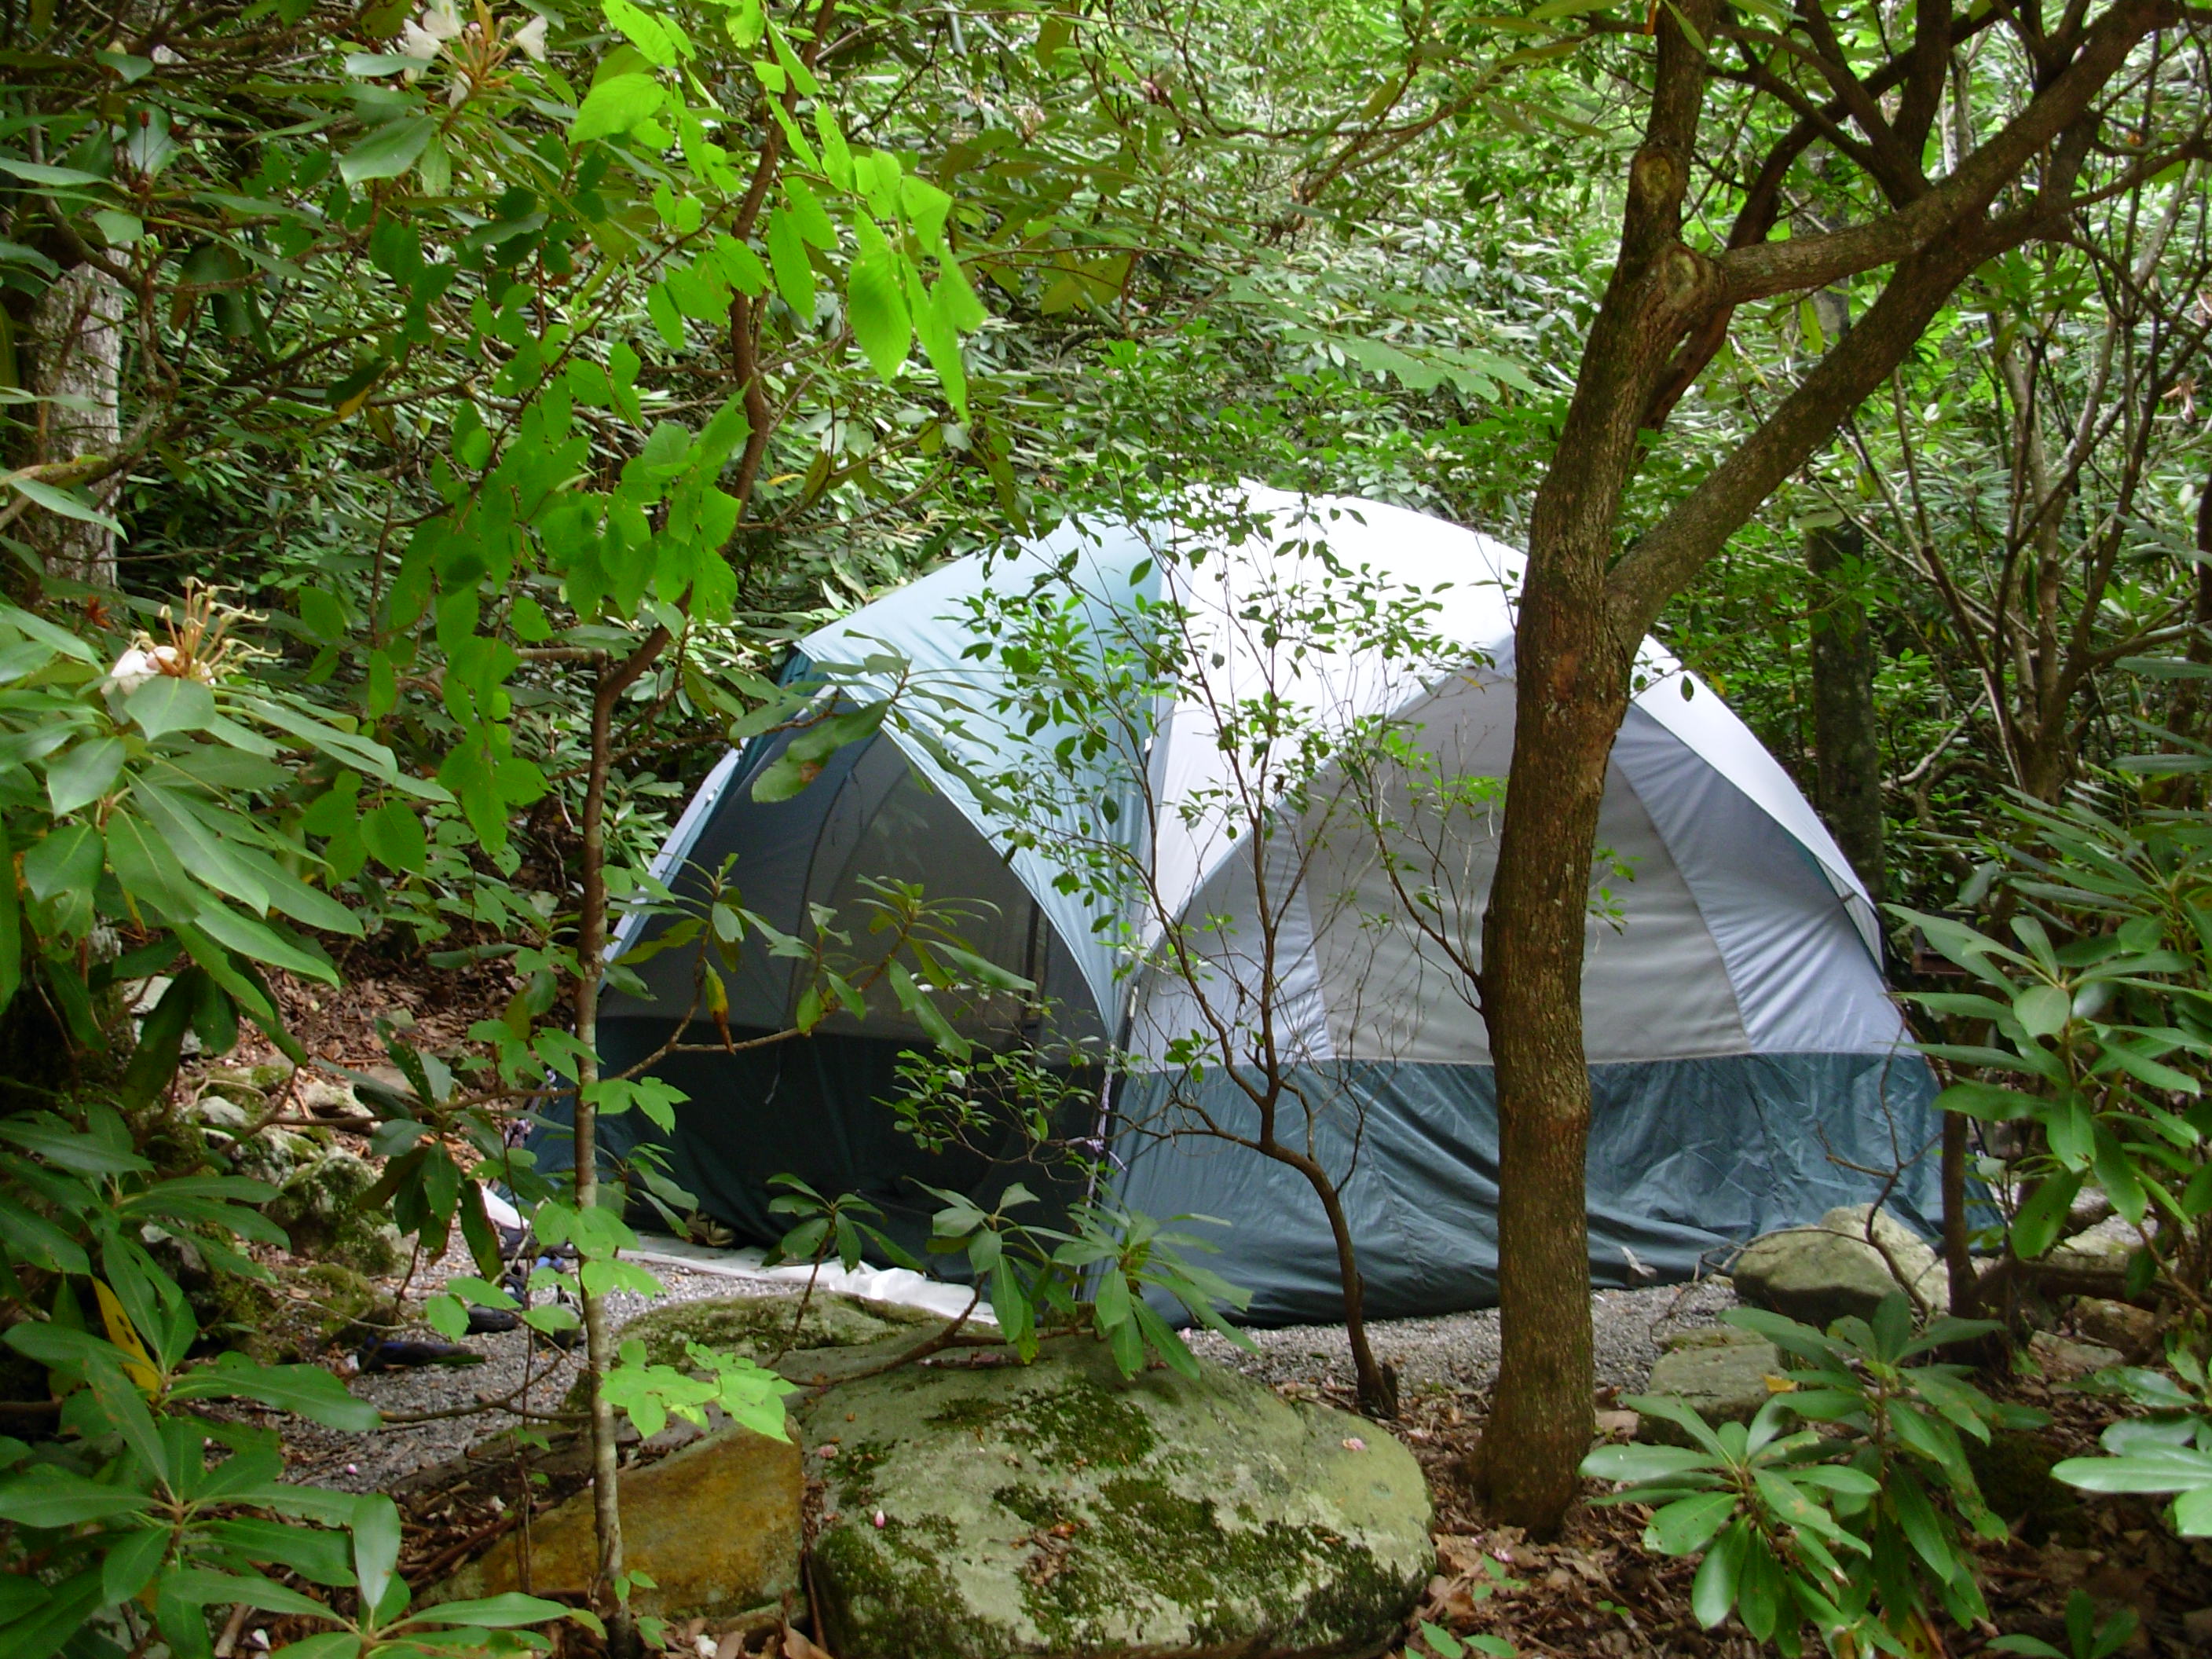 Tent set up at the Montreat campgrounds.